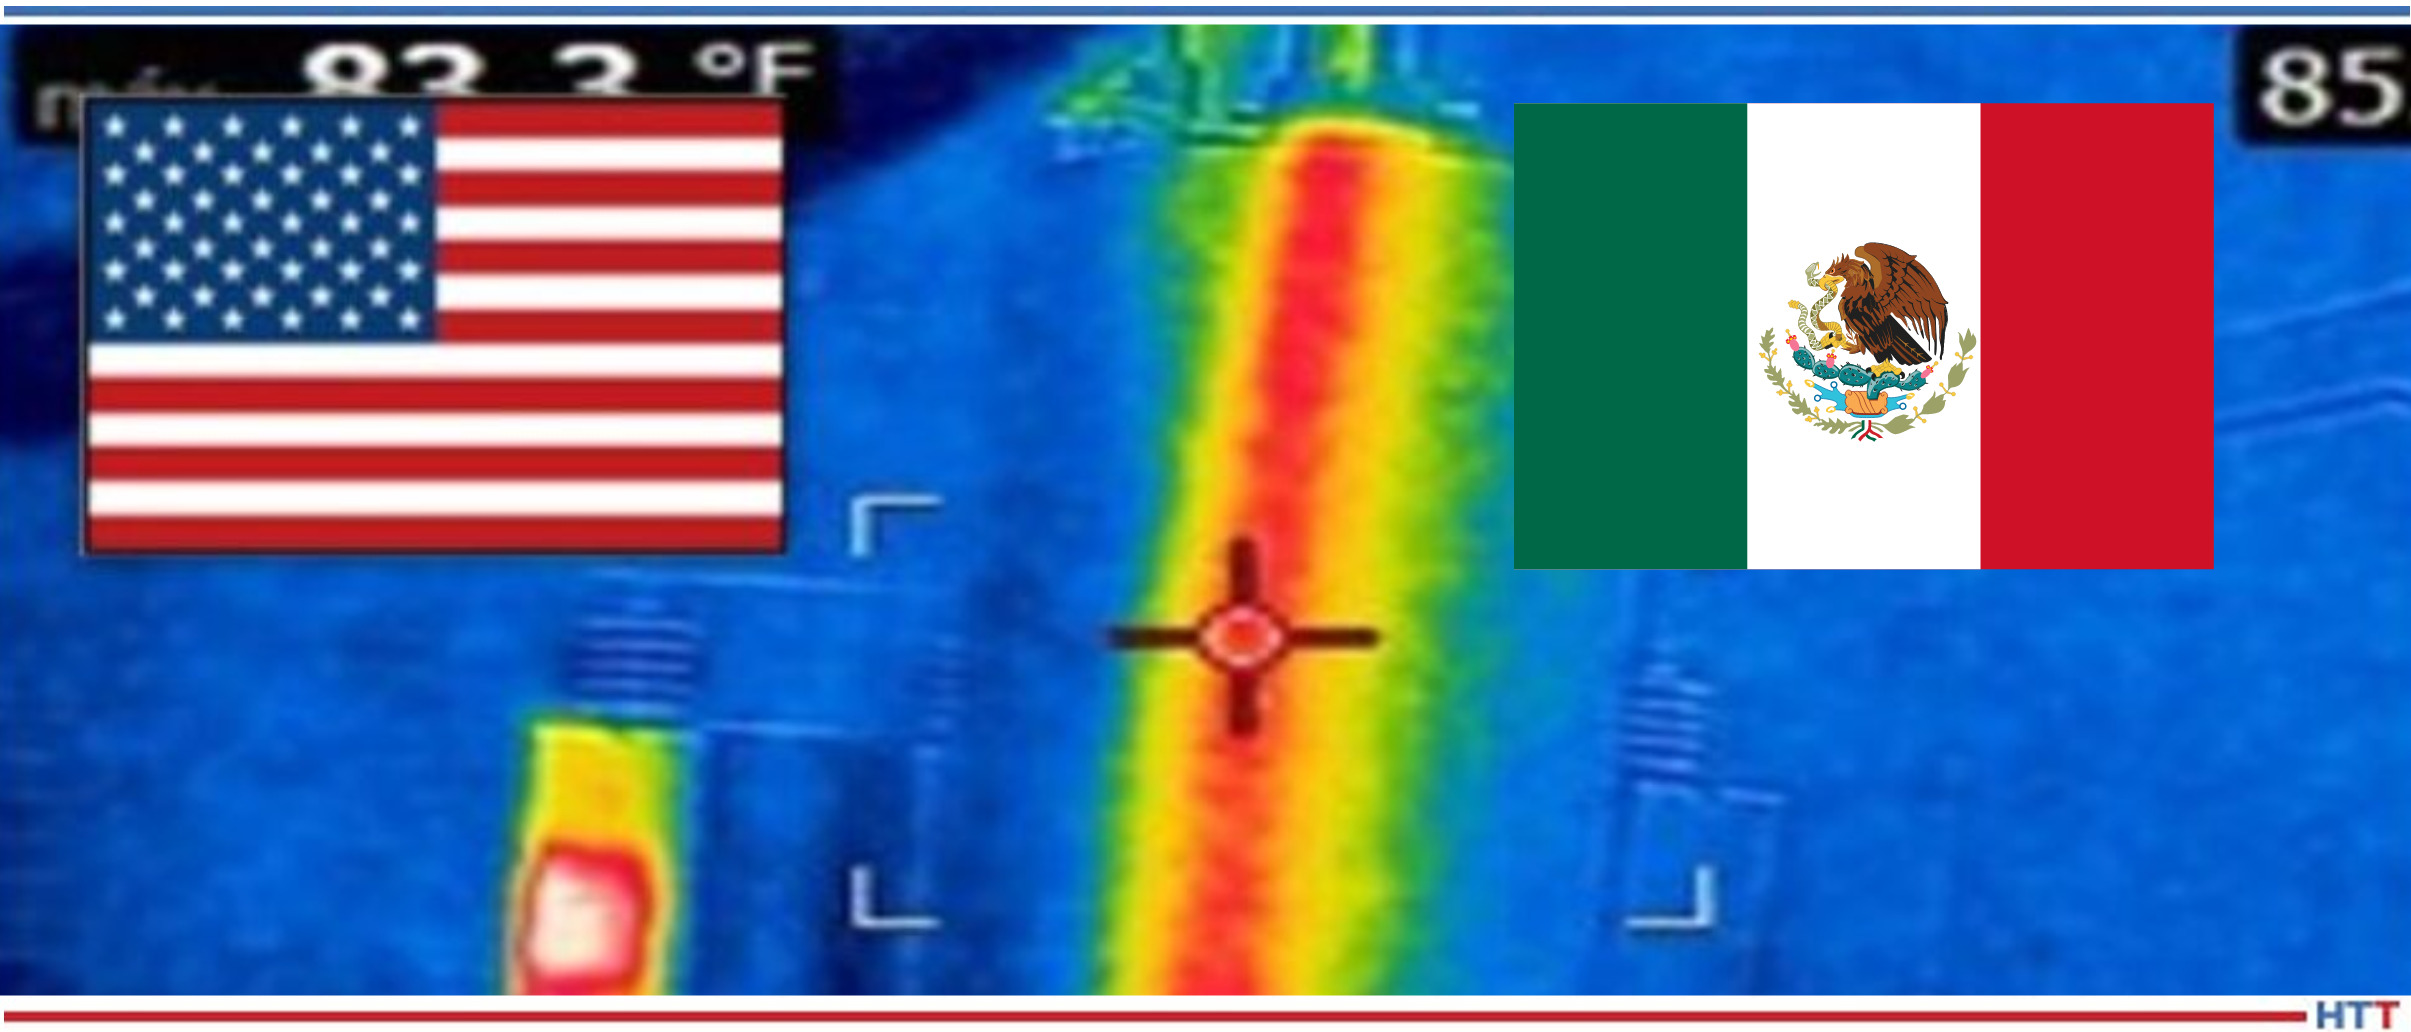 Thermal imaging of induction system at work with American and Mexican flag